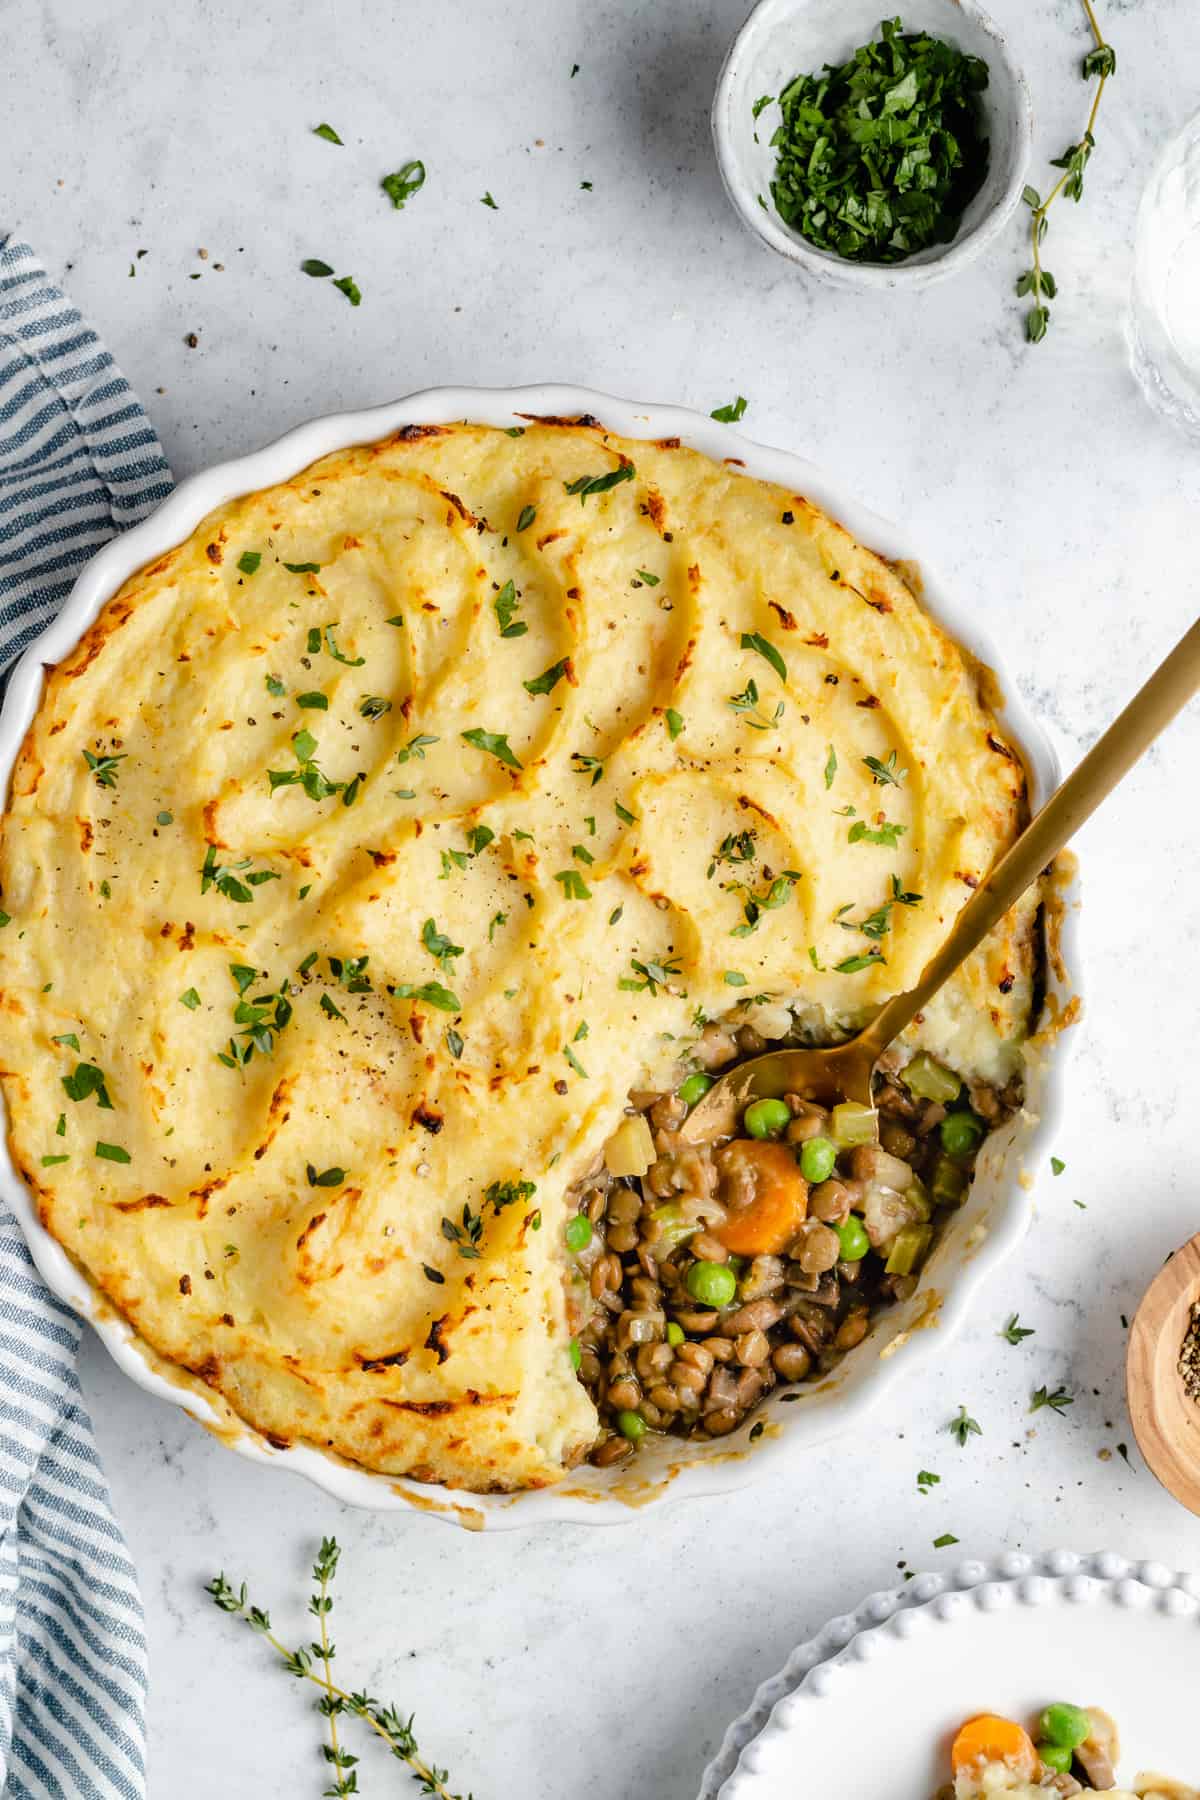 Vegetarian Shepherd's Pie with Lentils - Dishing Out Health